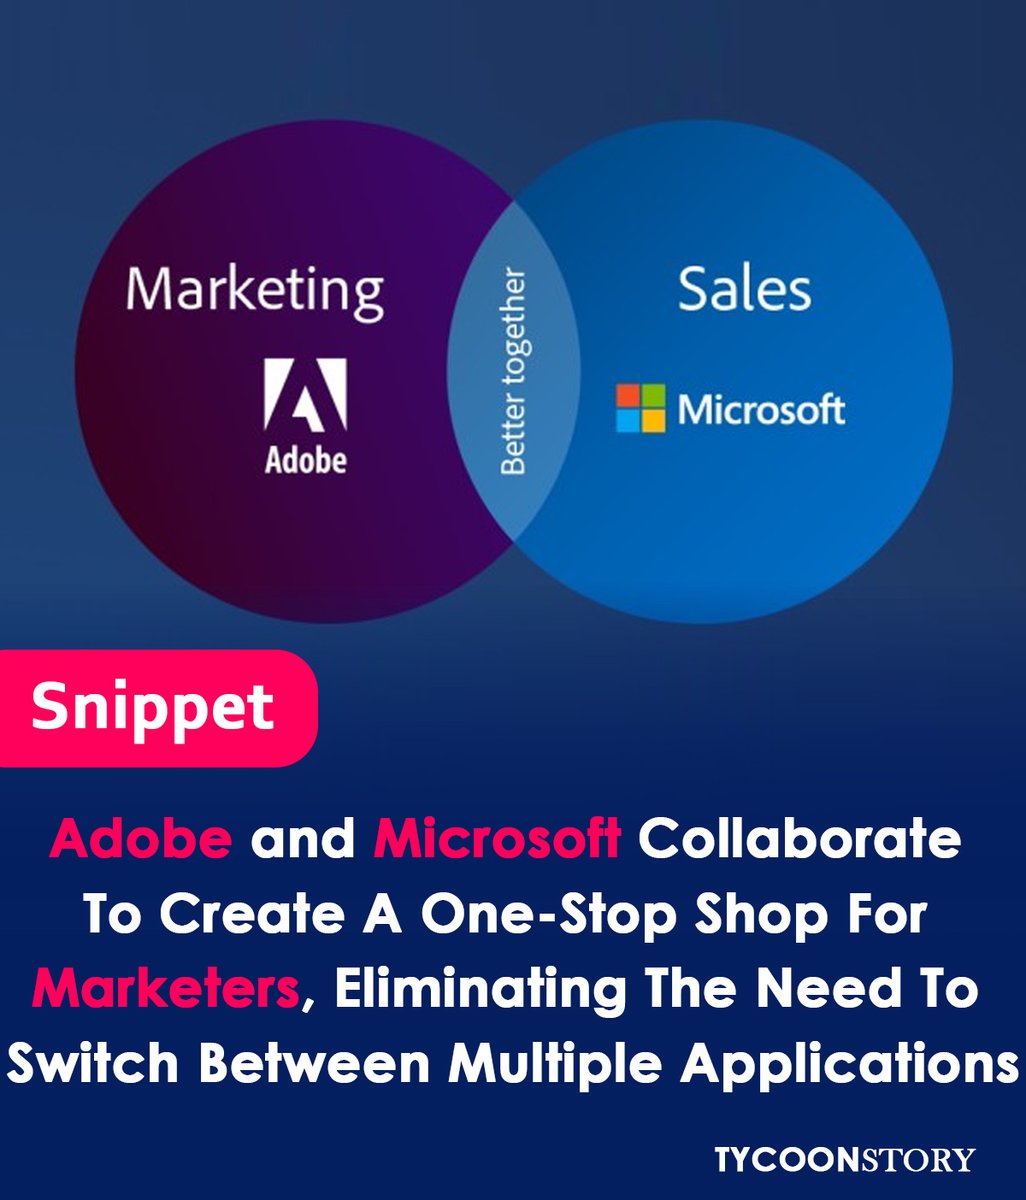 Adobe and Microsoft are partnering to integrate marketing tools for a more streamlined workflow for marketers.
#MarketingAutomation #Adobe #Microsoft #Microsoft365 #MarketingCloud #Collaboration #ContentMarketing #CampaignManagement #MarketingProductivity @Microsoft  @Adobe